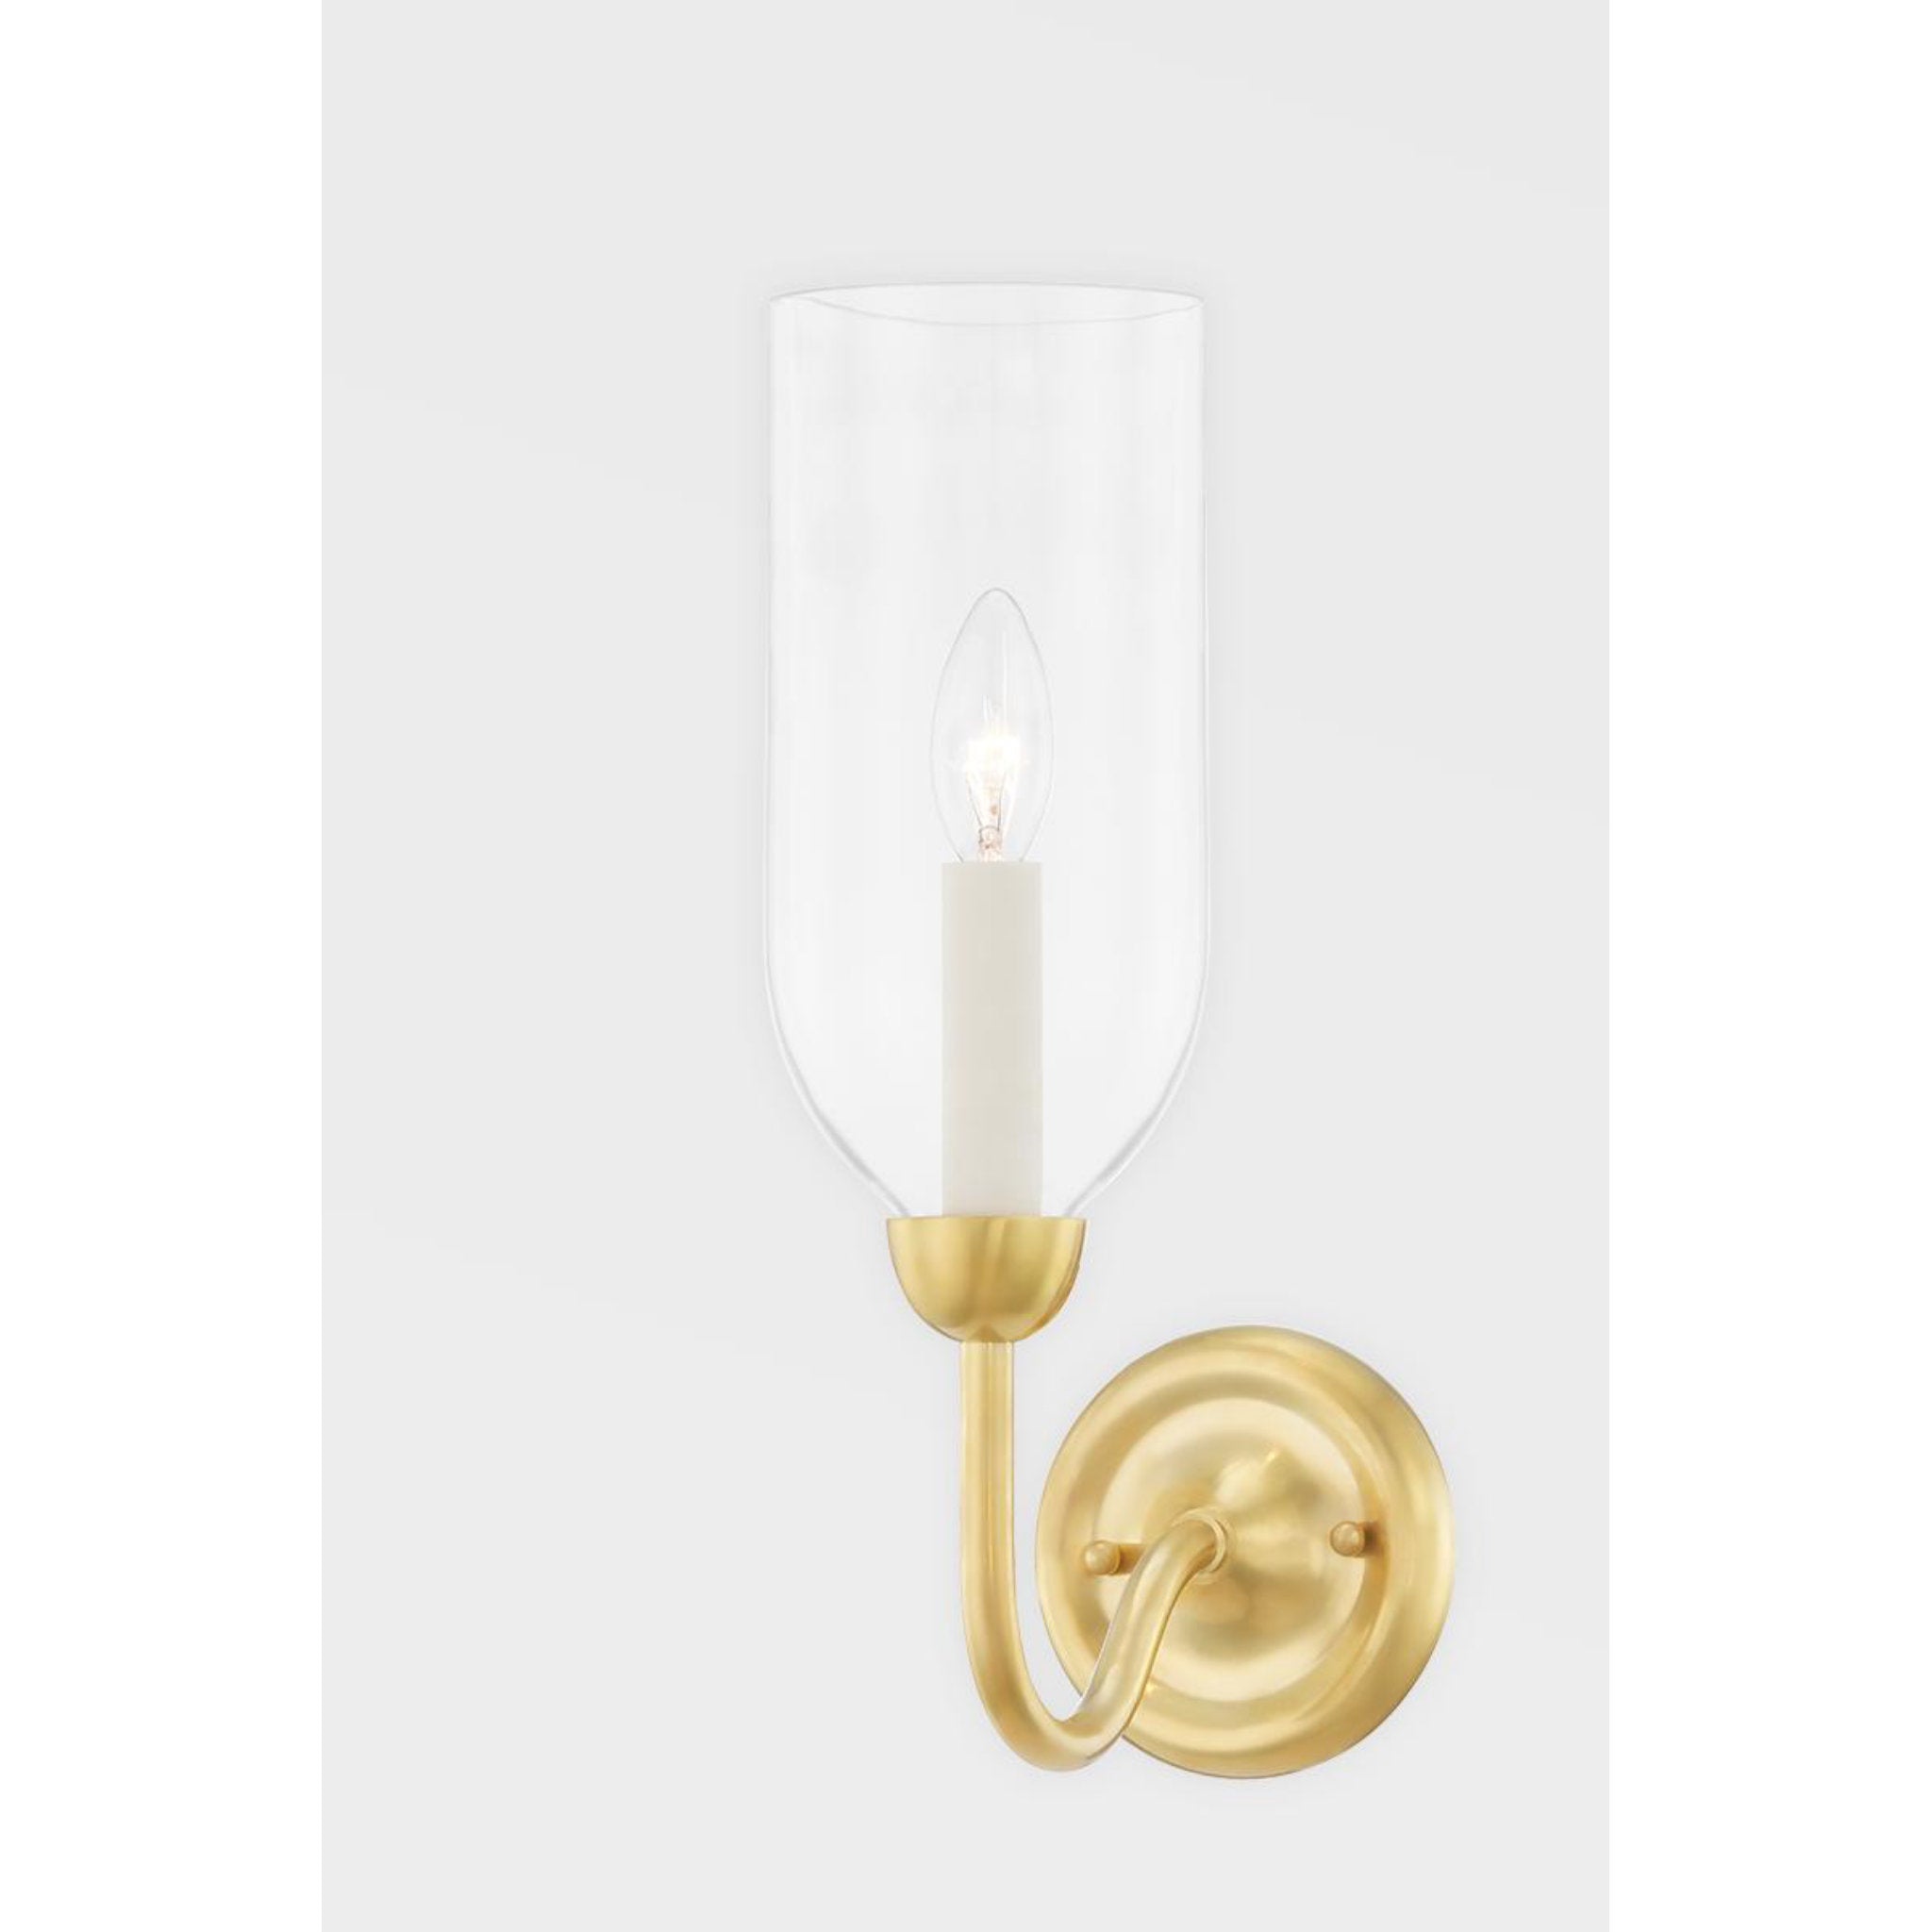 Classic No.1 2 Light Wall Sconce in Aged Brass by Mark D. Sikes